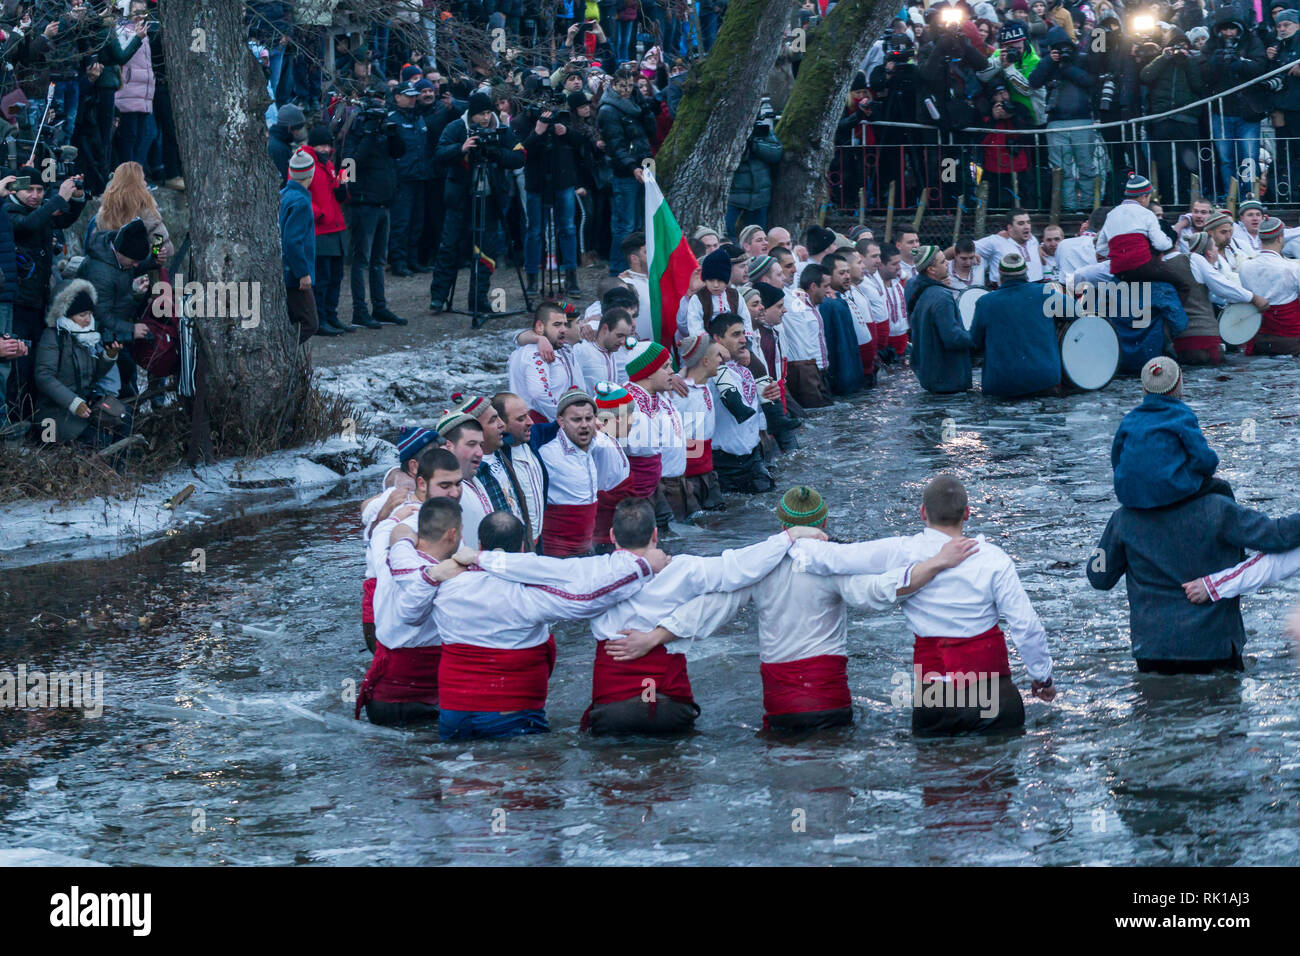 KALOFER, BULGARIA - JANUARY 06, 2019 - Traditional Bulgarian horo dance in the cold icy waters of Tundzha river in Kalofer city Bulgaria. Stock Photo